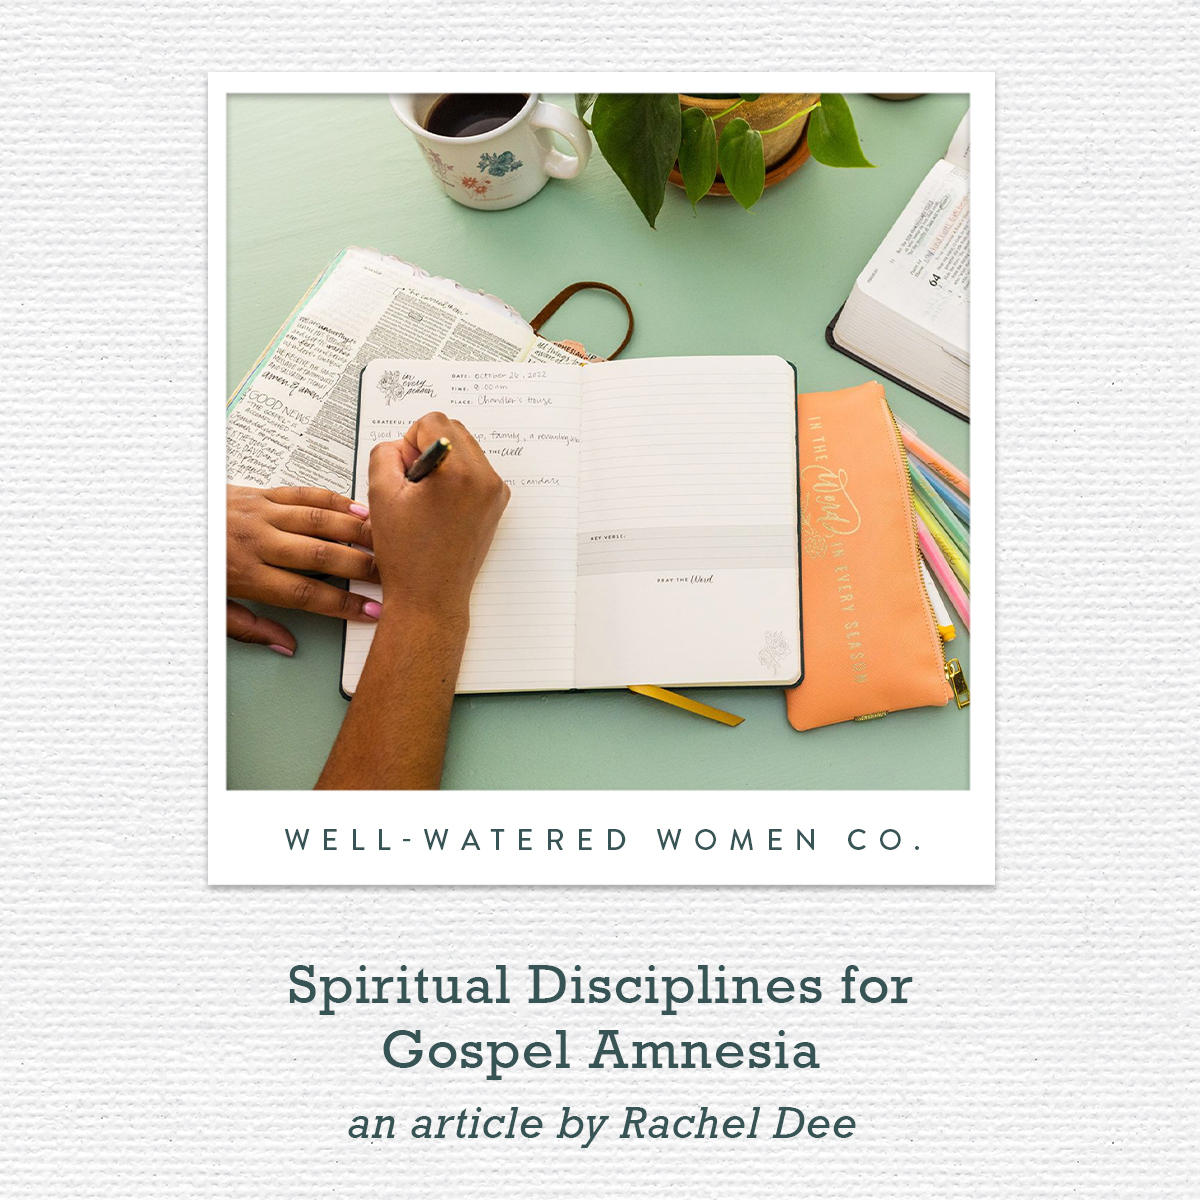 Spiritual Disciplines for Gospel Amnesia - an Article from Well-Watered Women